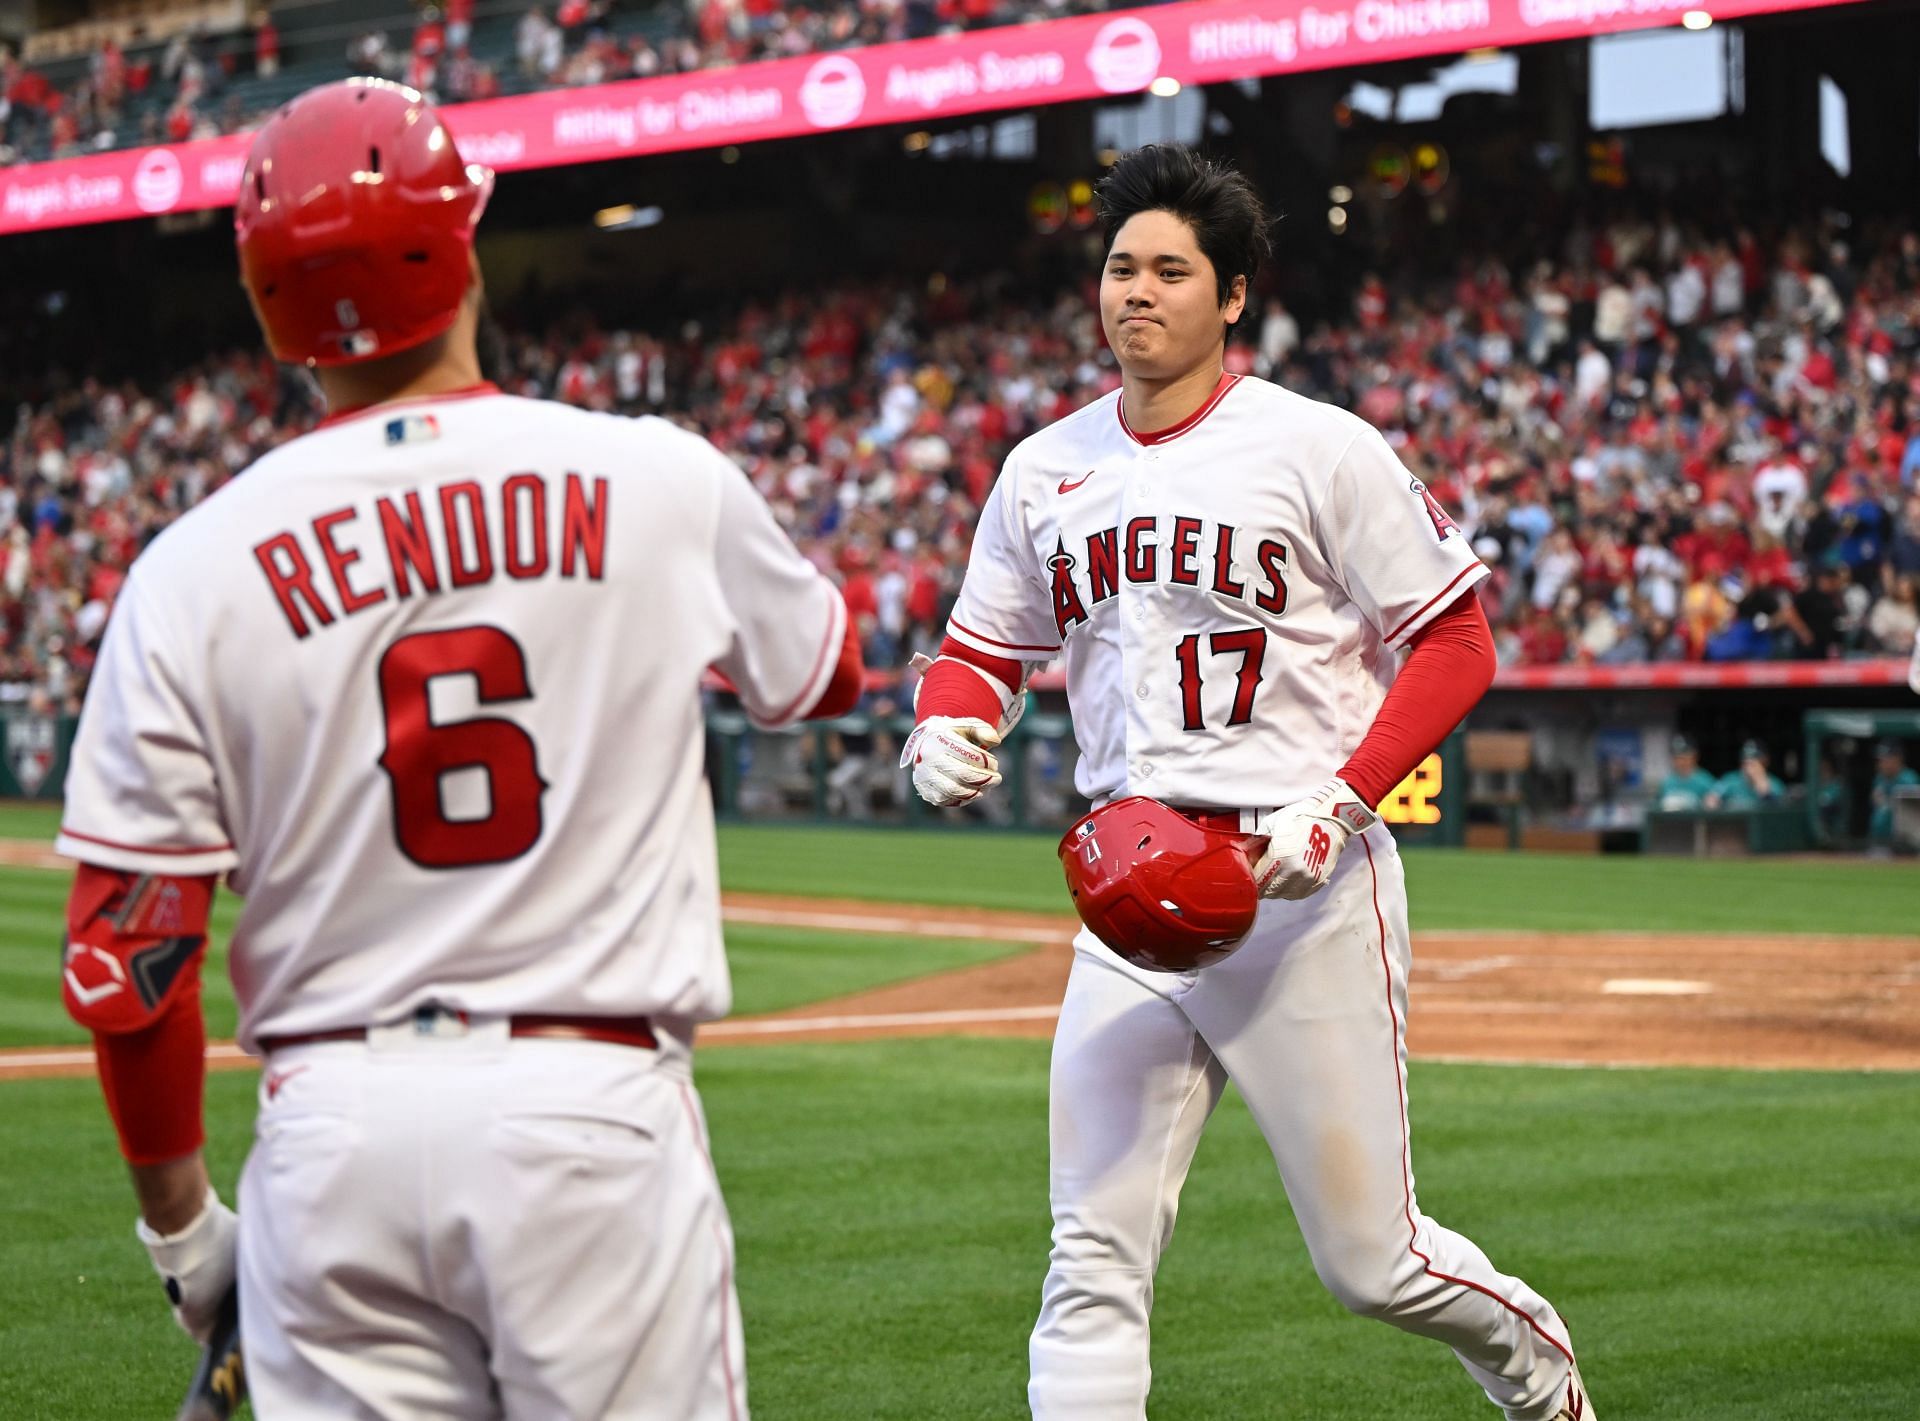 Angels' Rendon raises eyebrows with 'no habla ingles' response to health  question